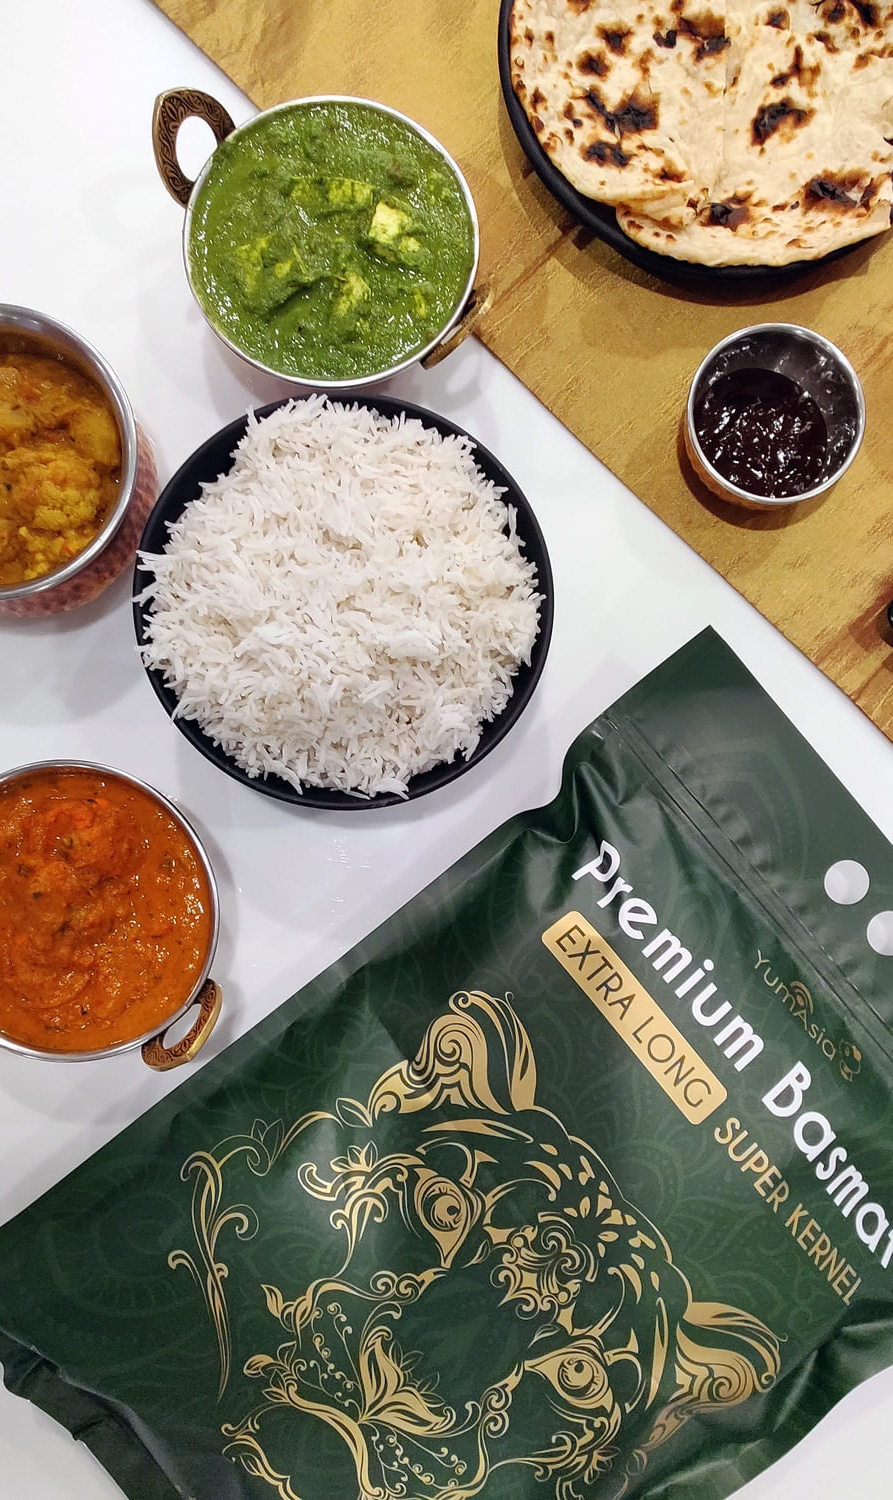 Super-Kernel-Basmati-rice-on-table-with-Indian-food-2